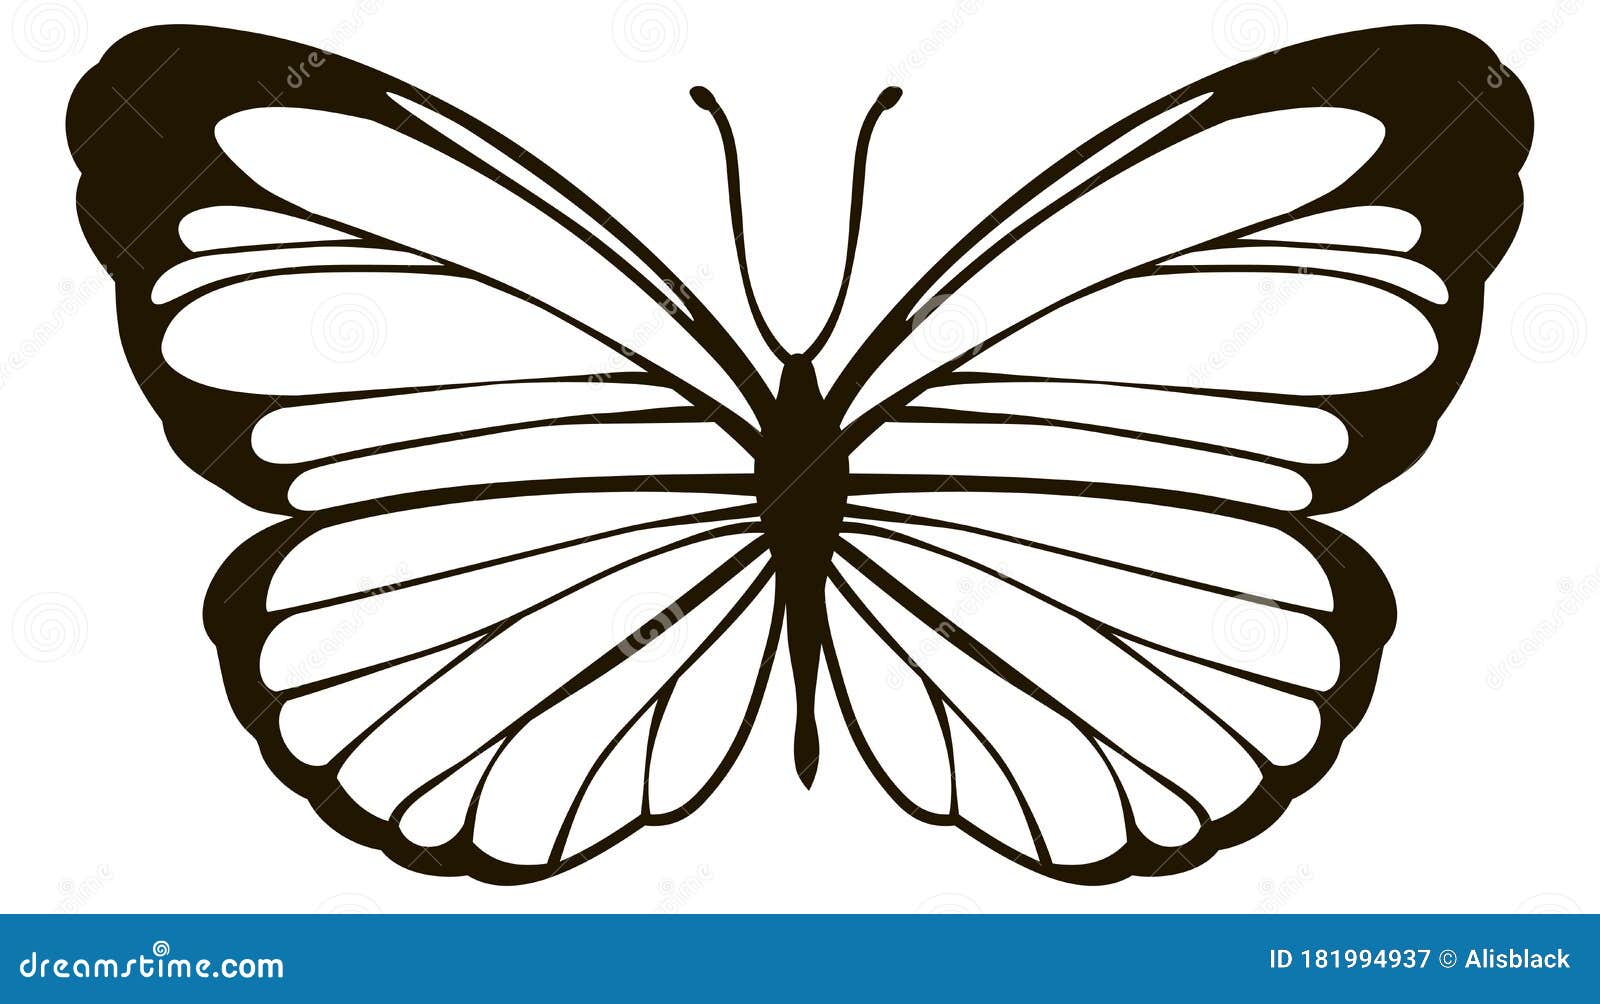 Simplified Stylized Lovely Butterfly Vector Outline Stock Vector ...